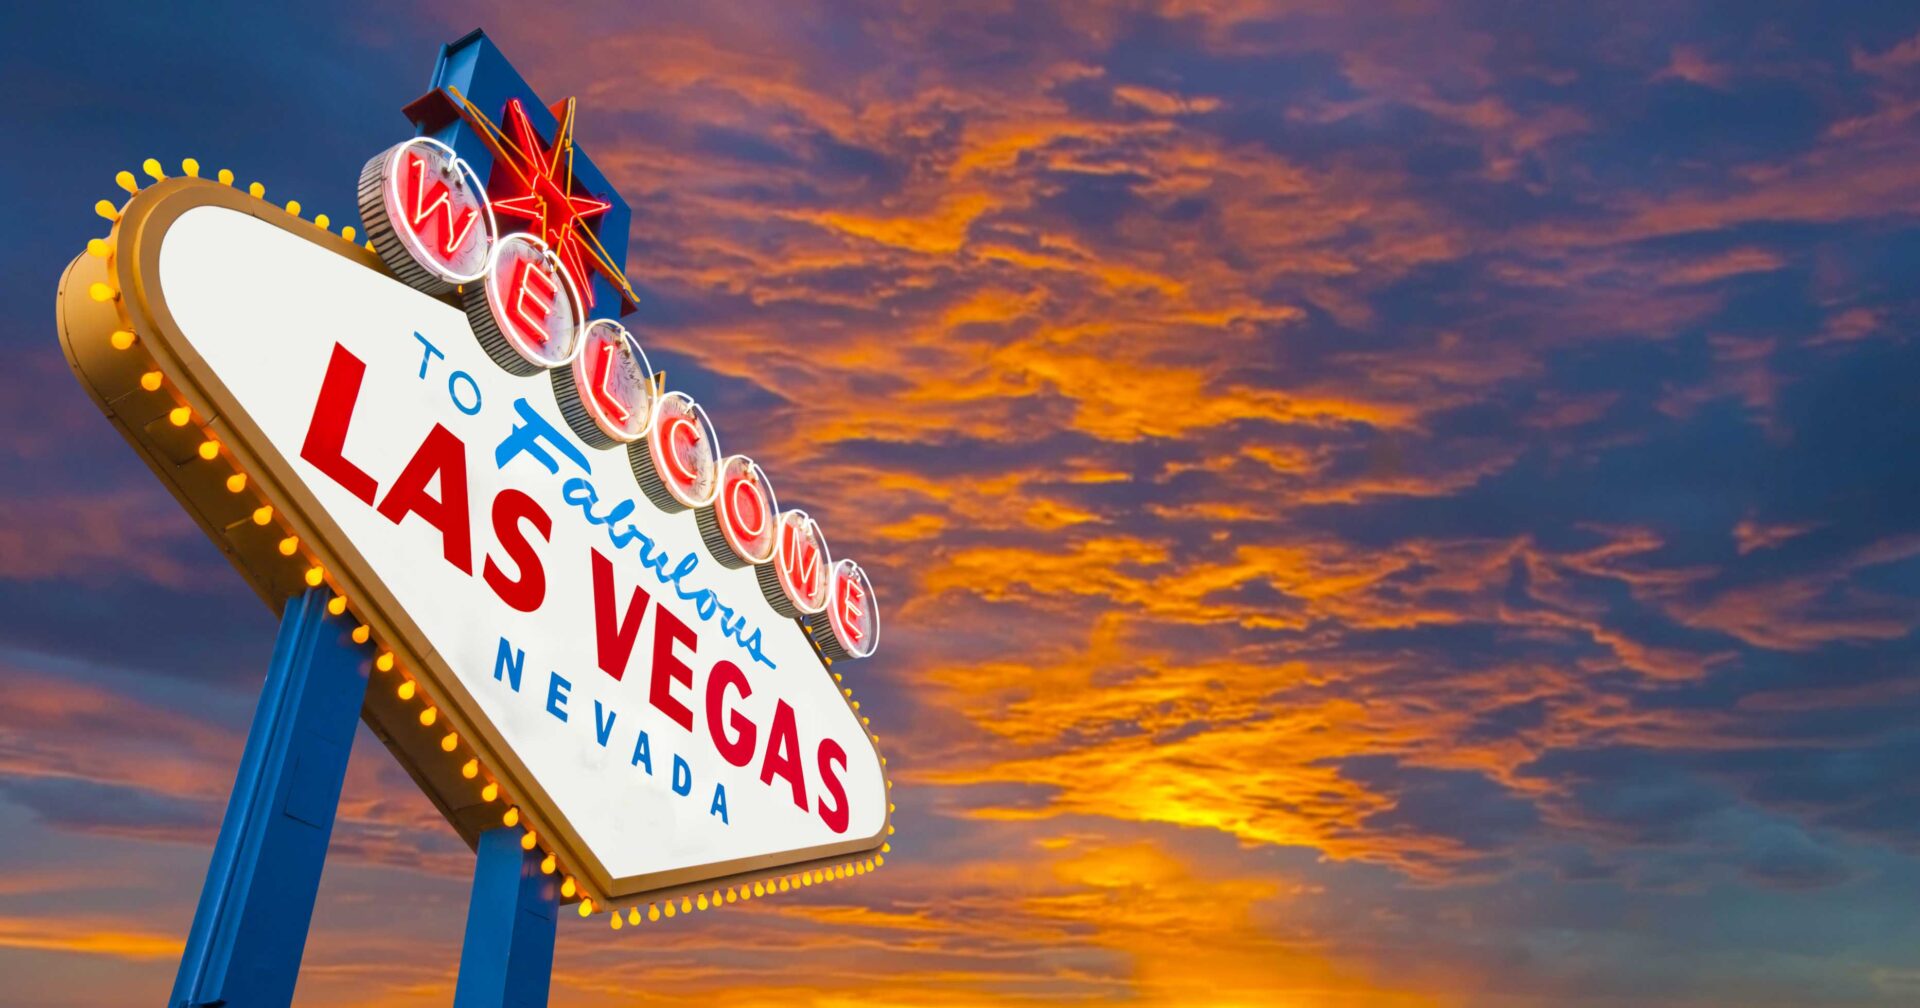 Fabulous Las Vegas sign - when is the best time to visit?